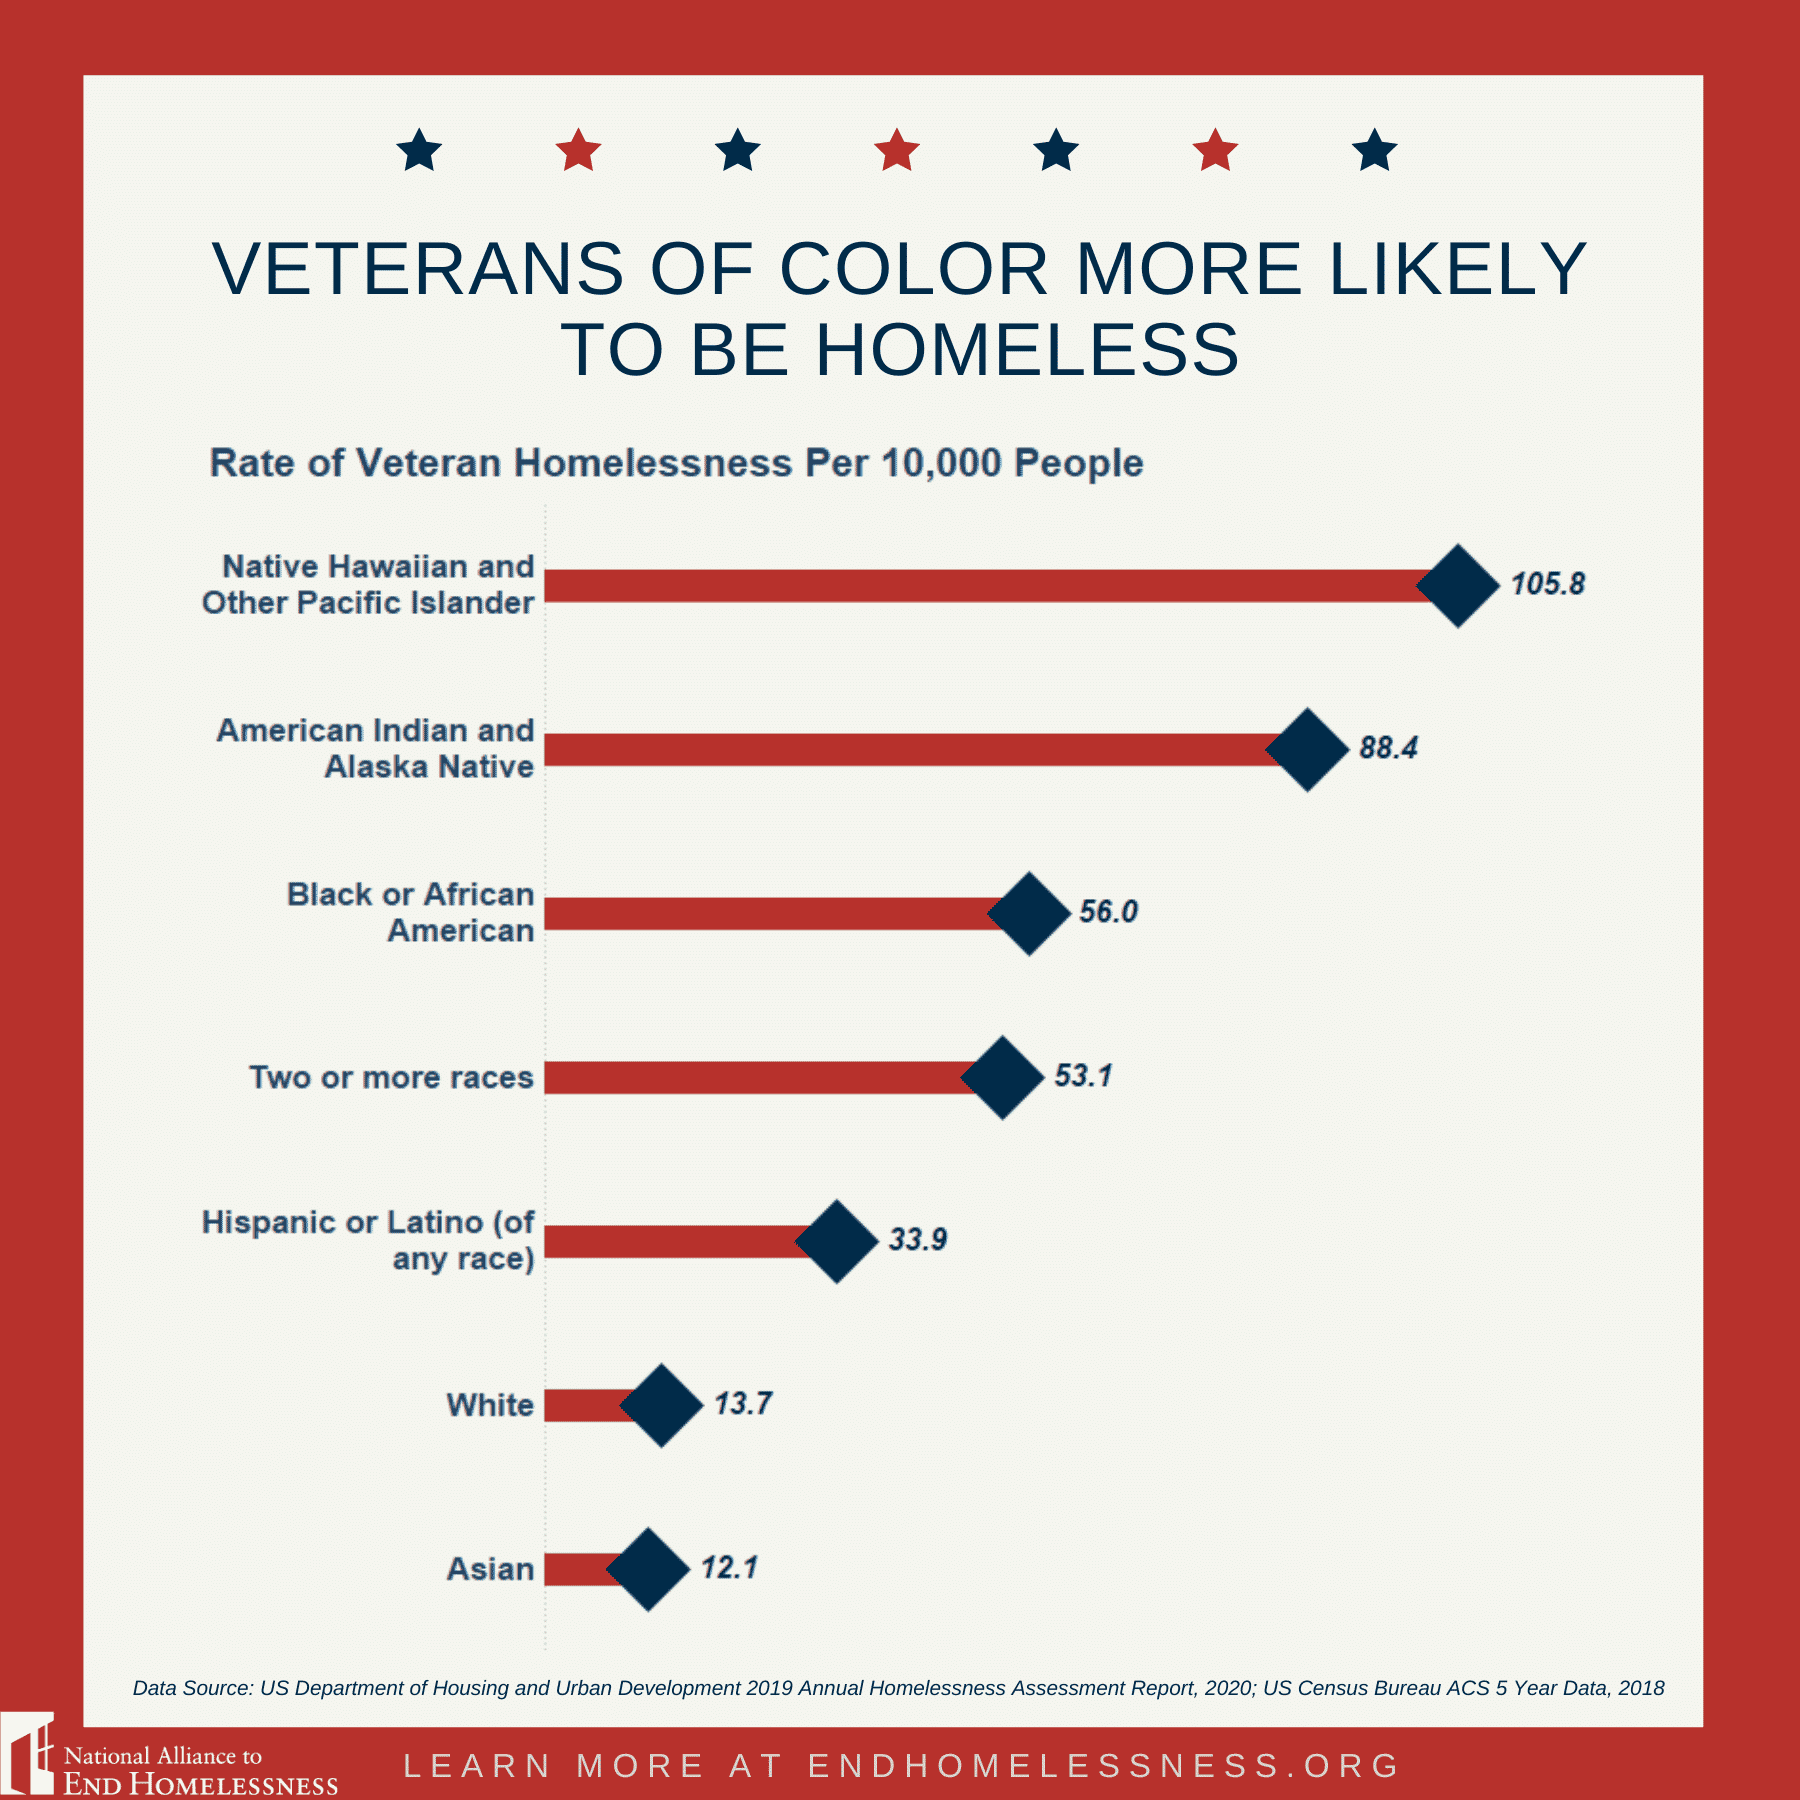 5 Key Facts About Homeless Veterans